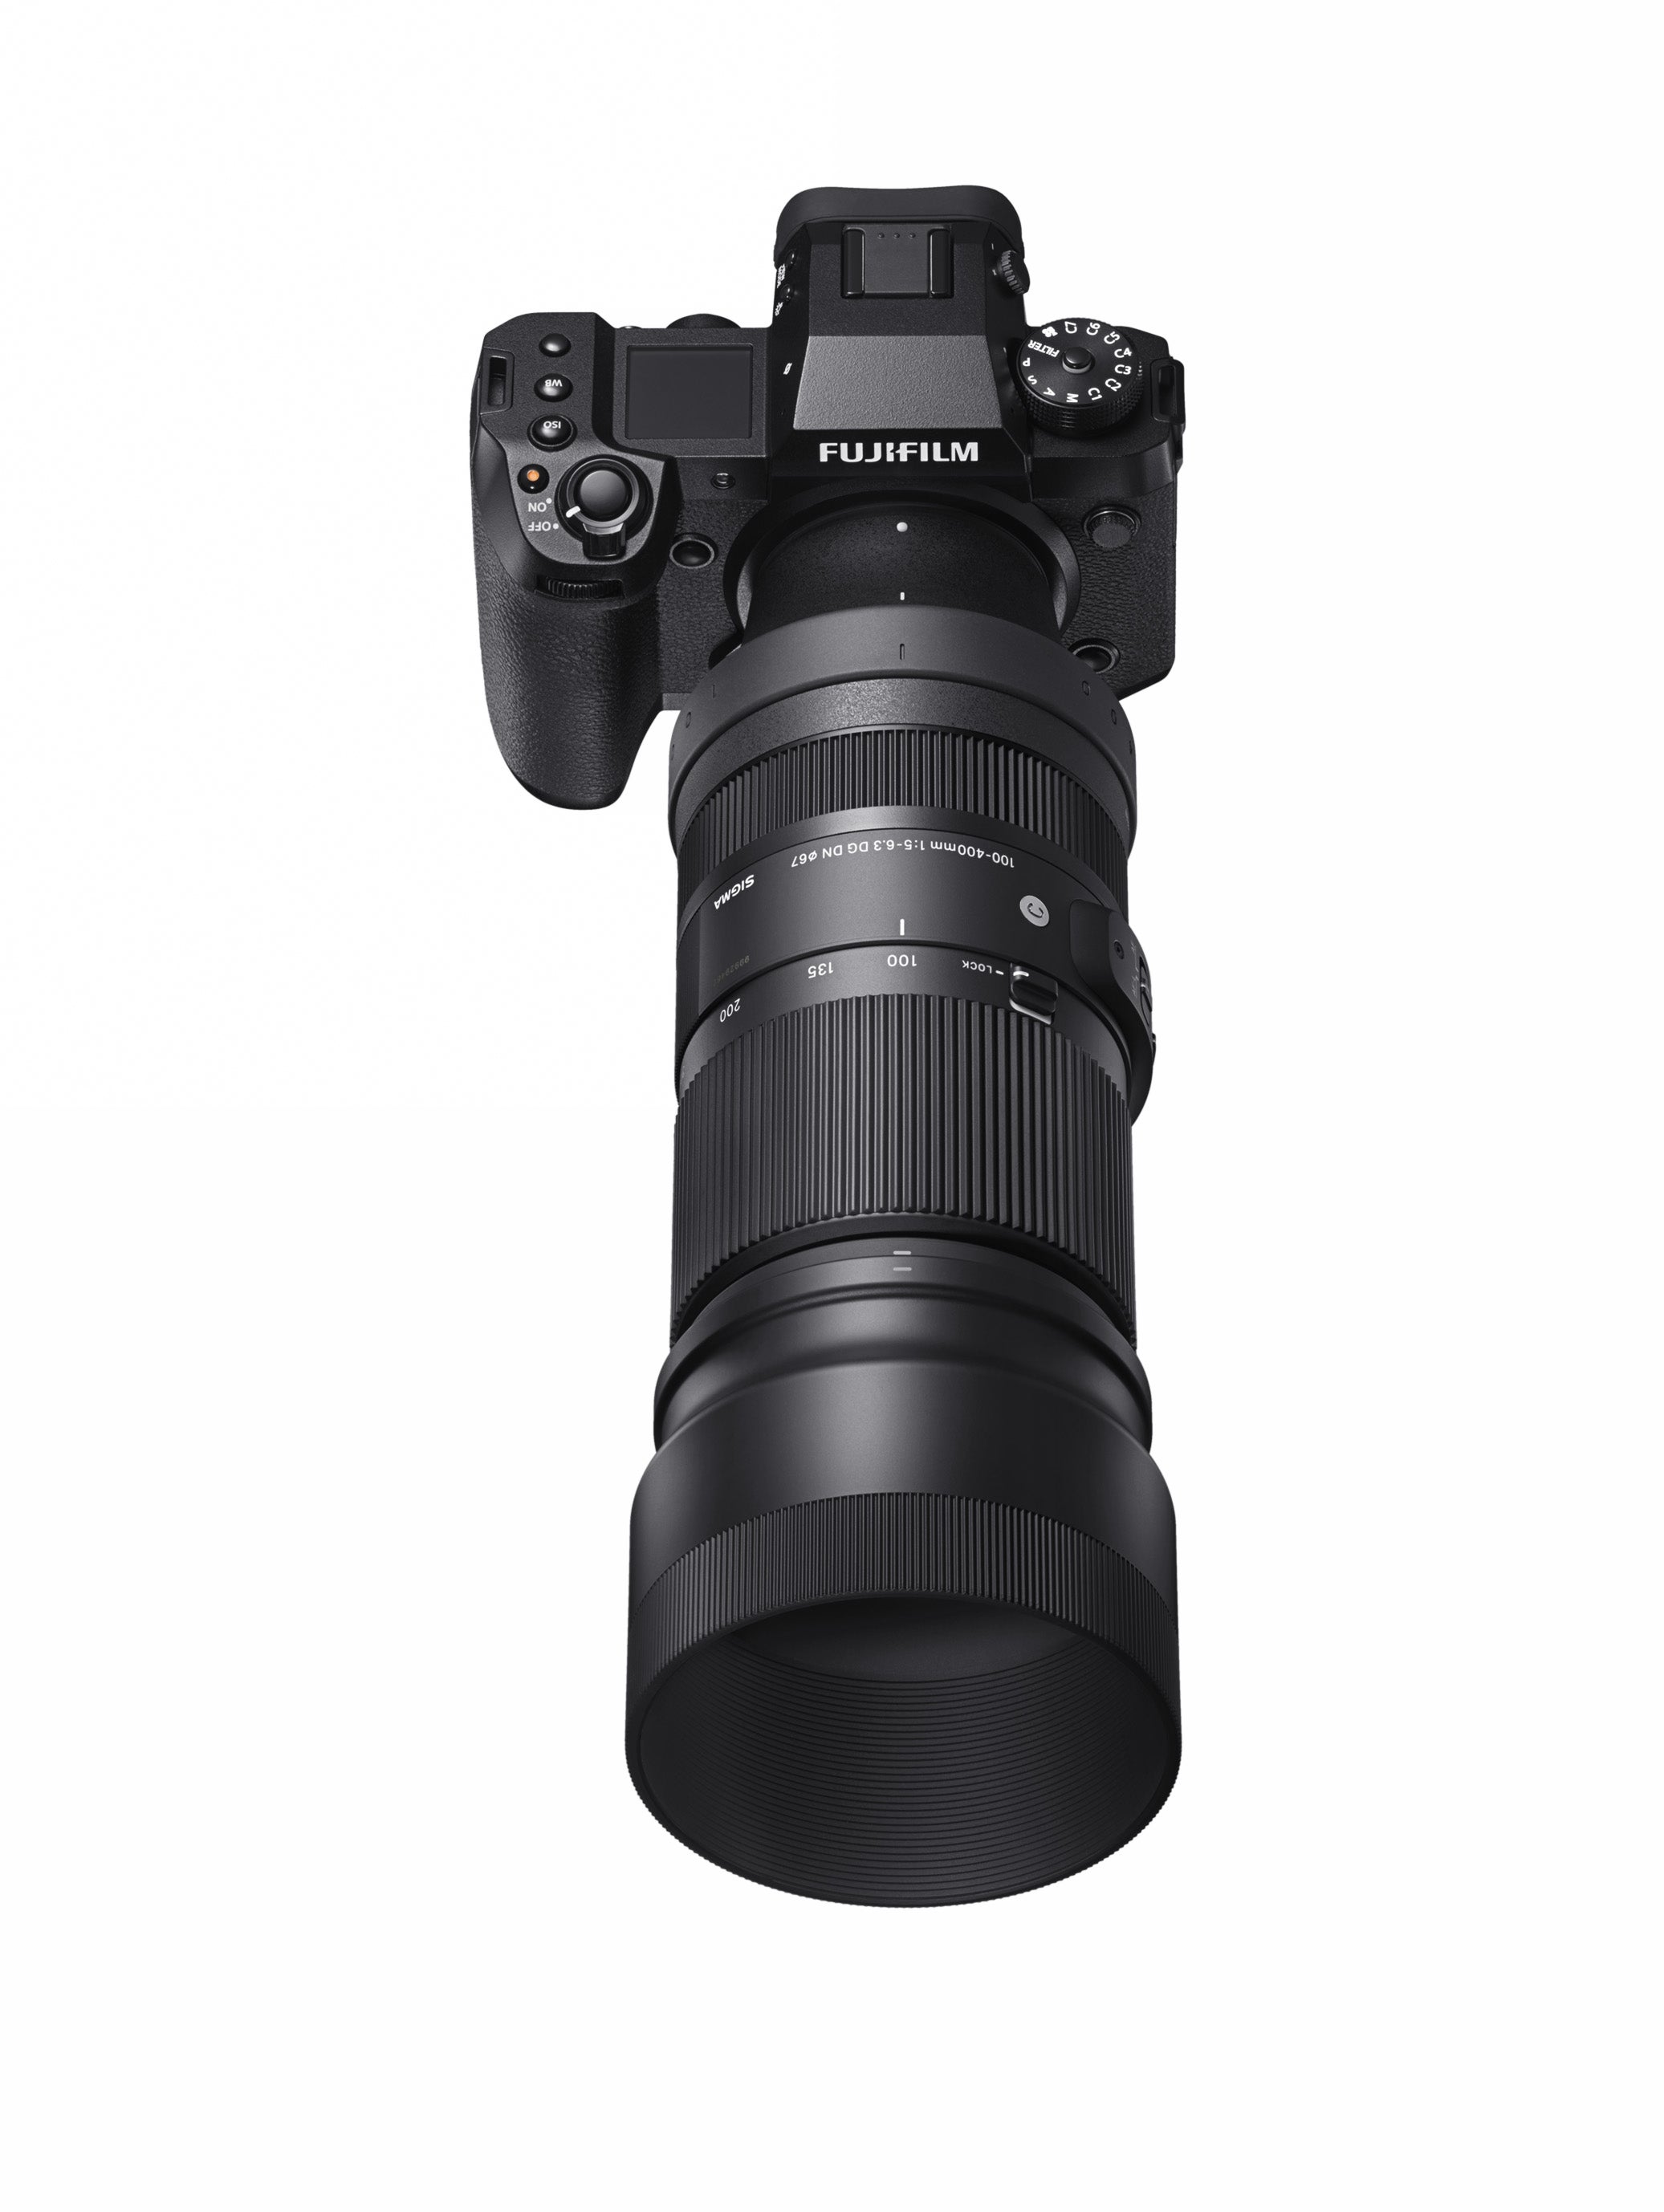 Image of Sigma 100-400mm Lens 